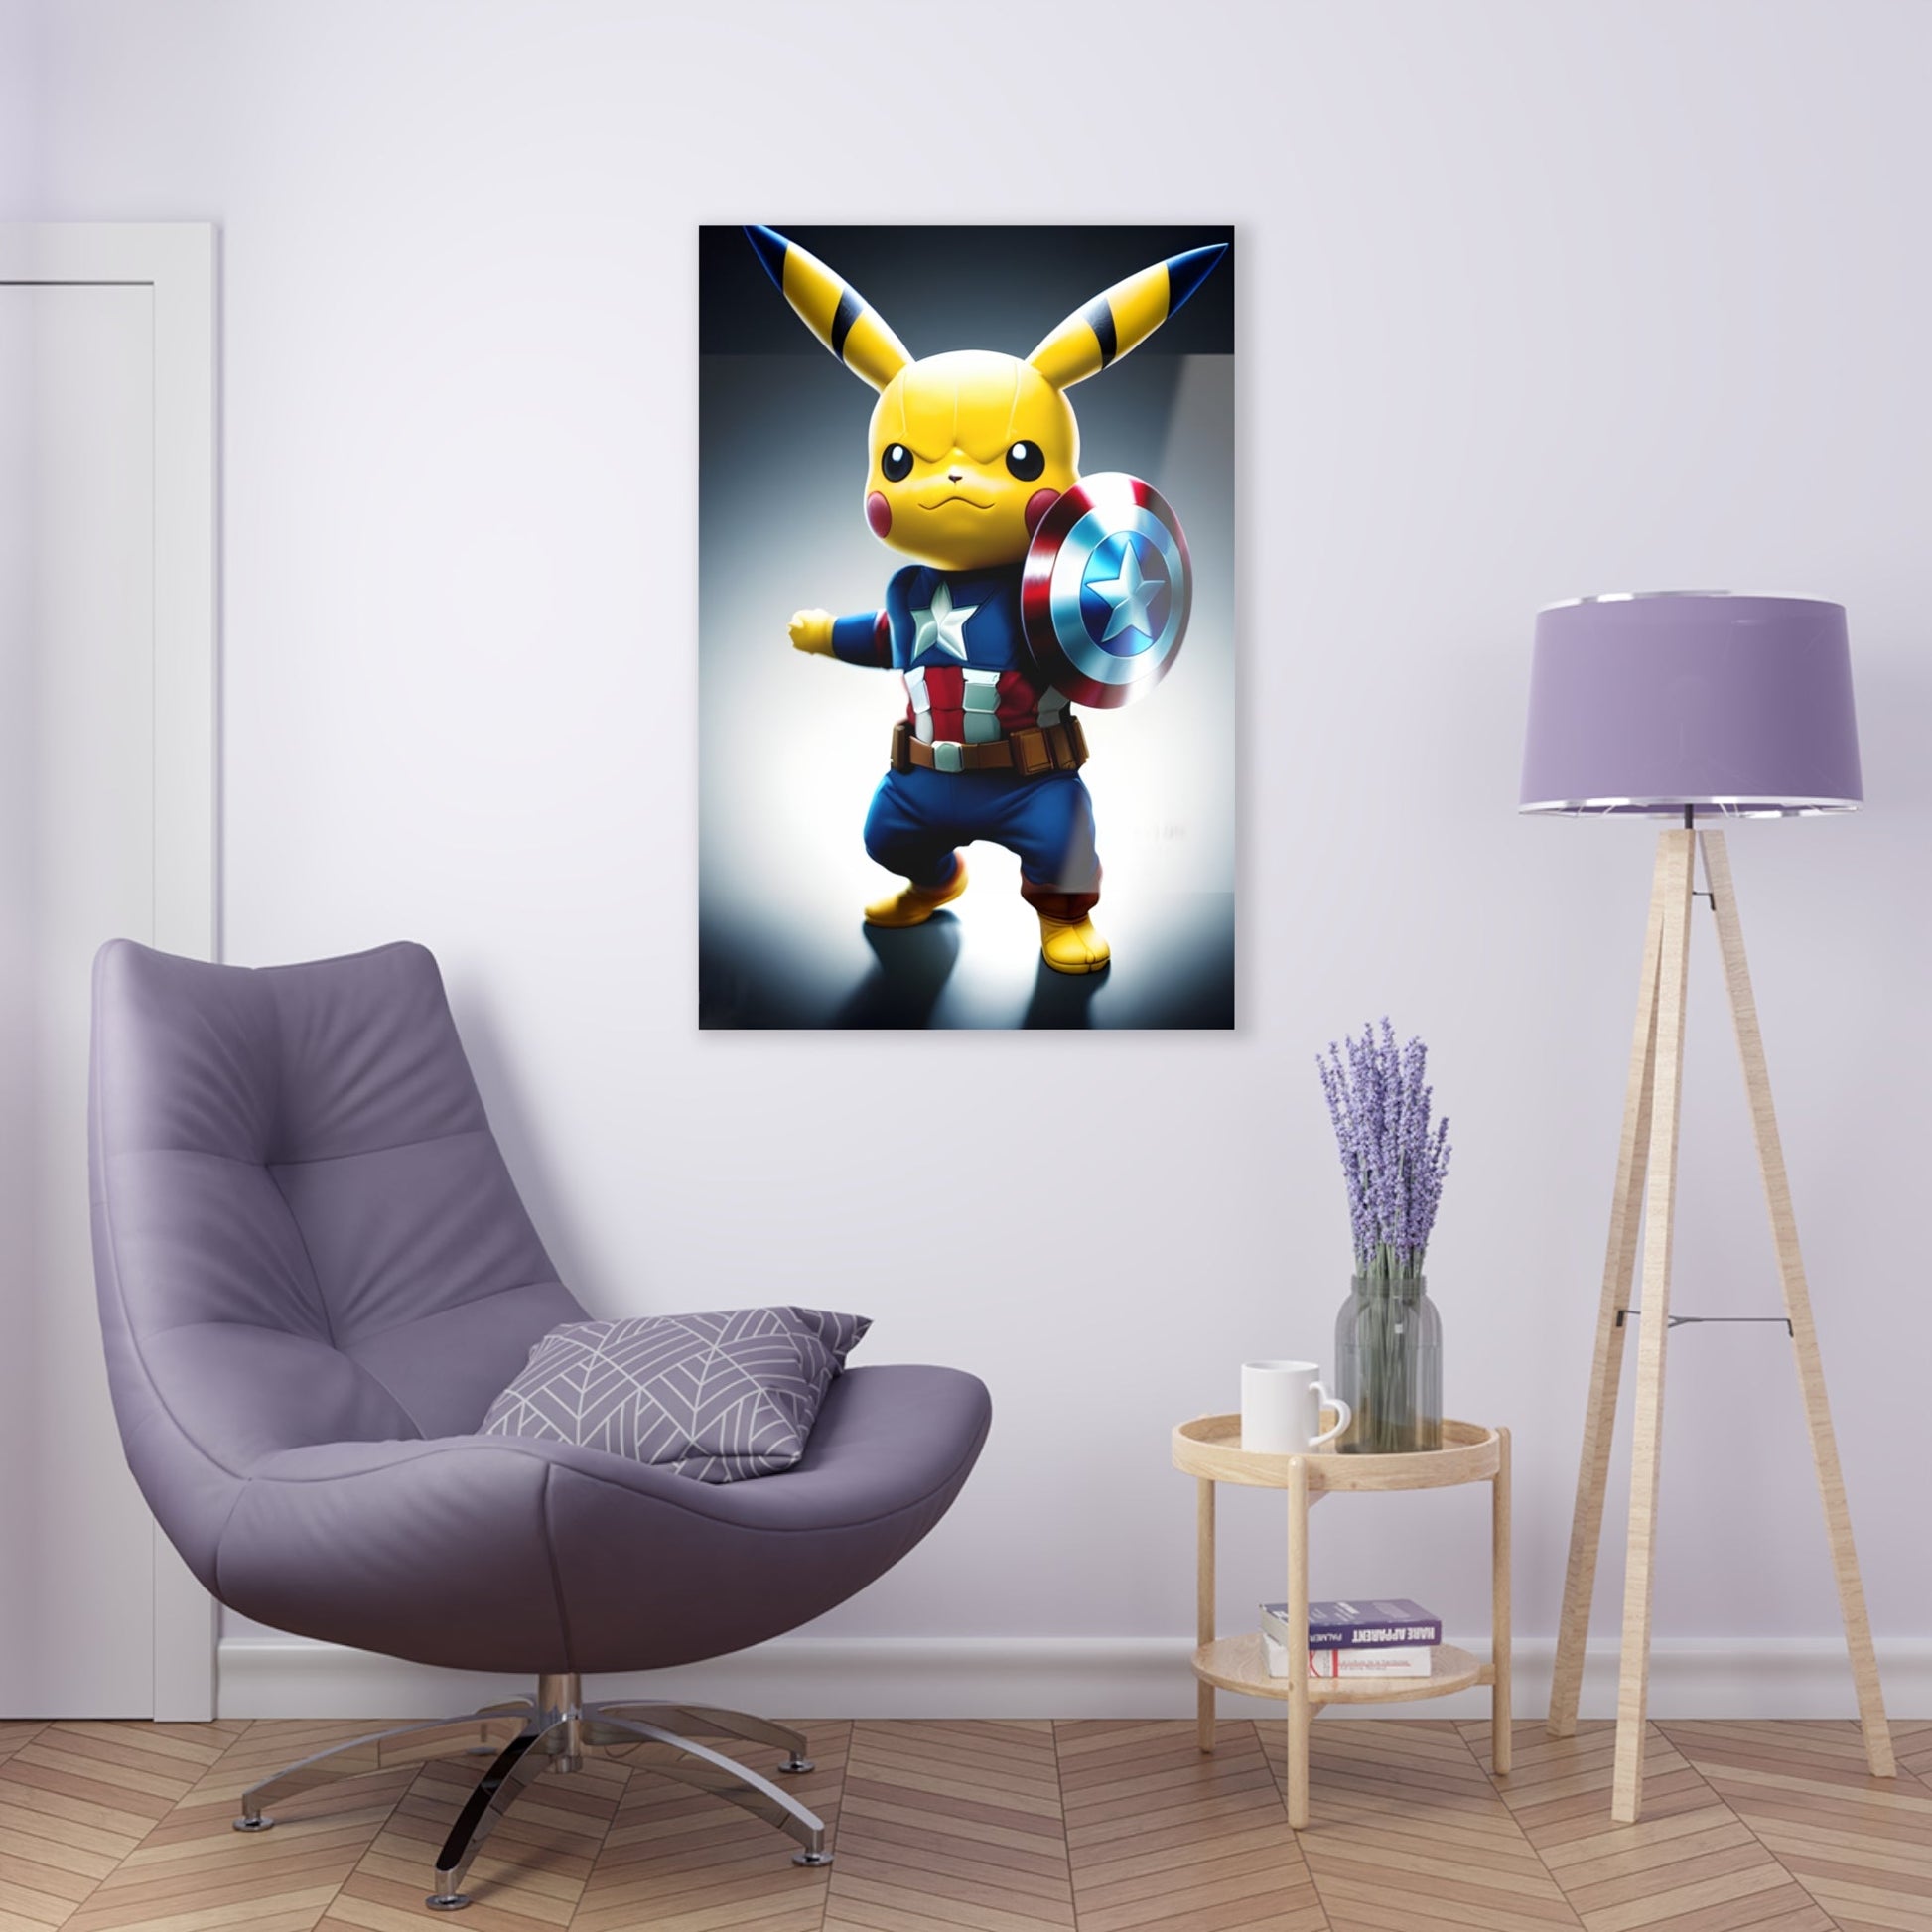 Acrylic print of Captain Americhu 3 hanging on a white door above a lavender chair, with a coordinating lavender-shaded lamp and a round coffee table featuring a coffee mug and lavender plant in a mason jar.